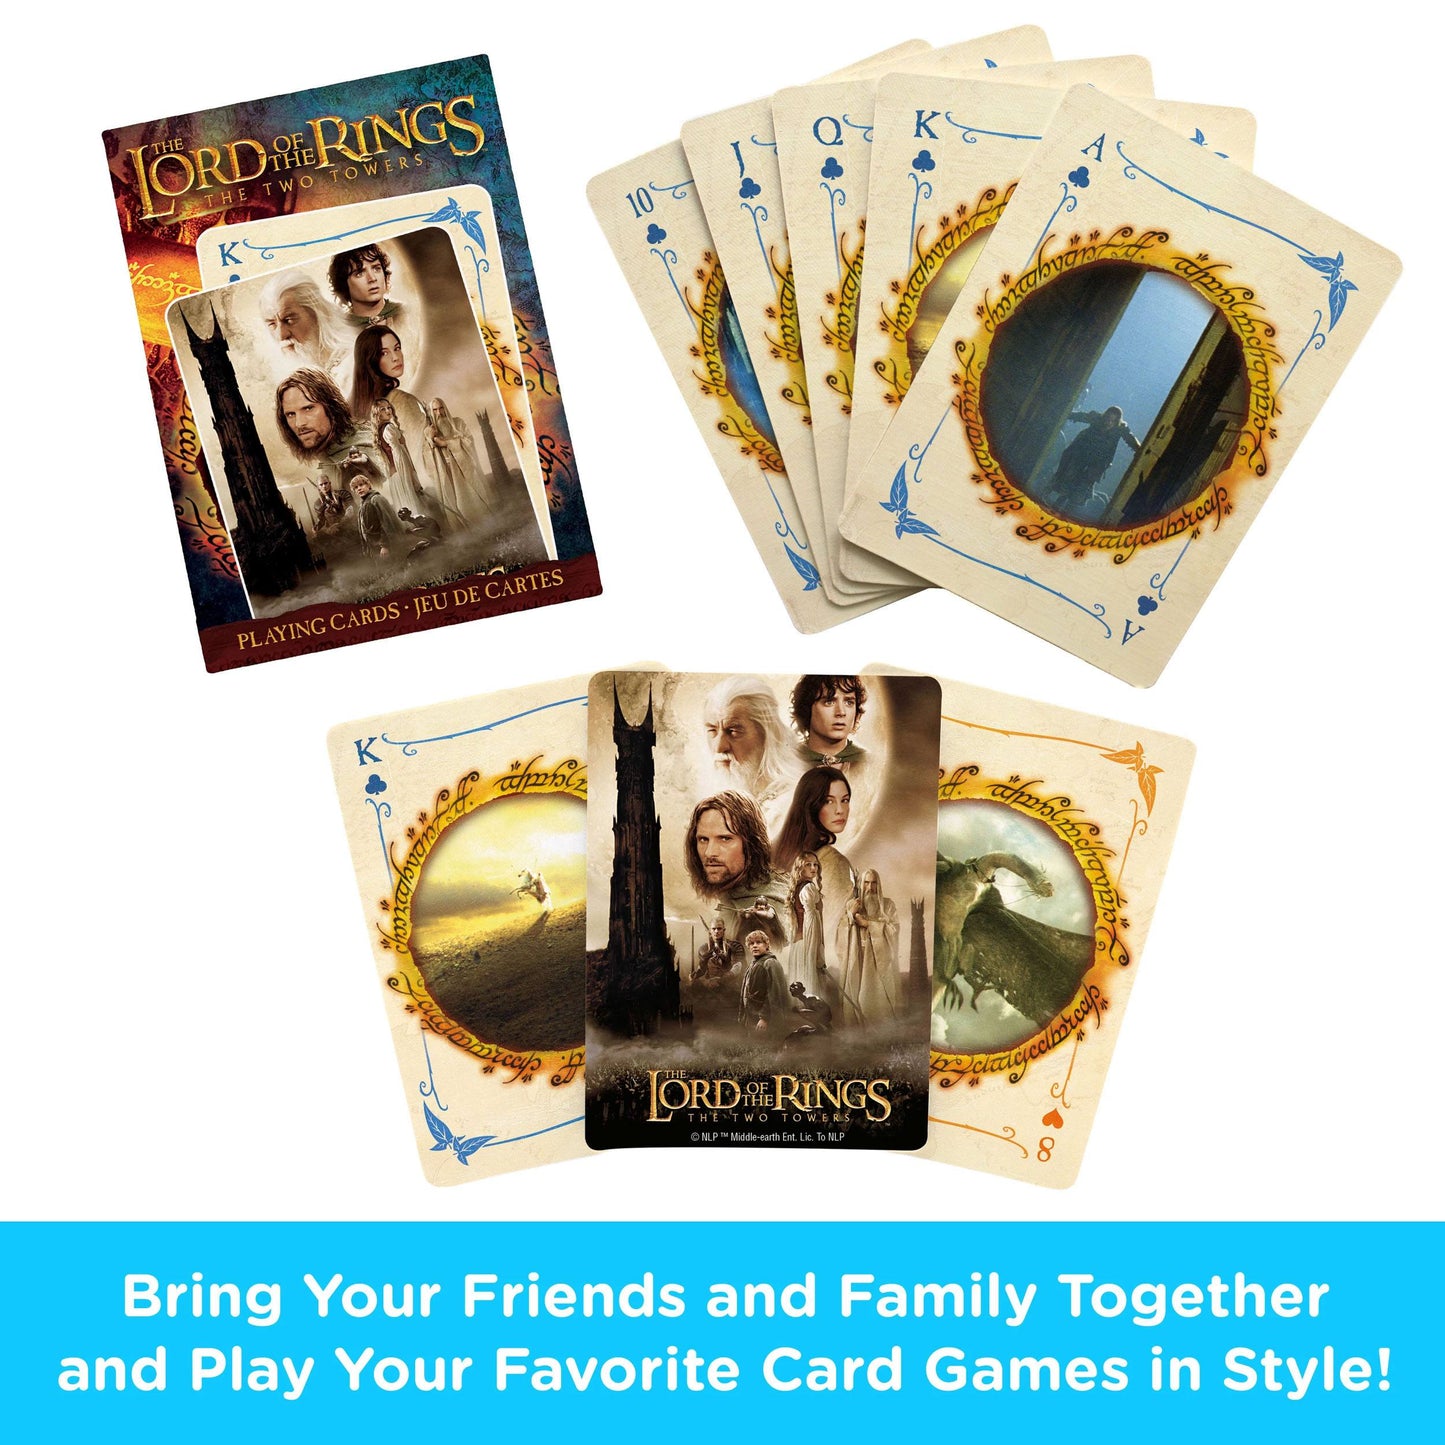 The Lord of the Rings Card Game - The Two Towers 